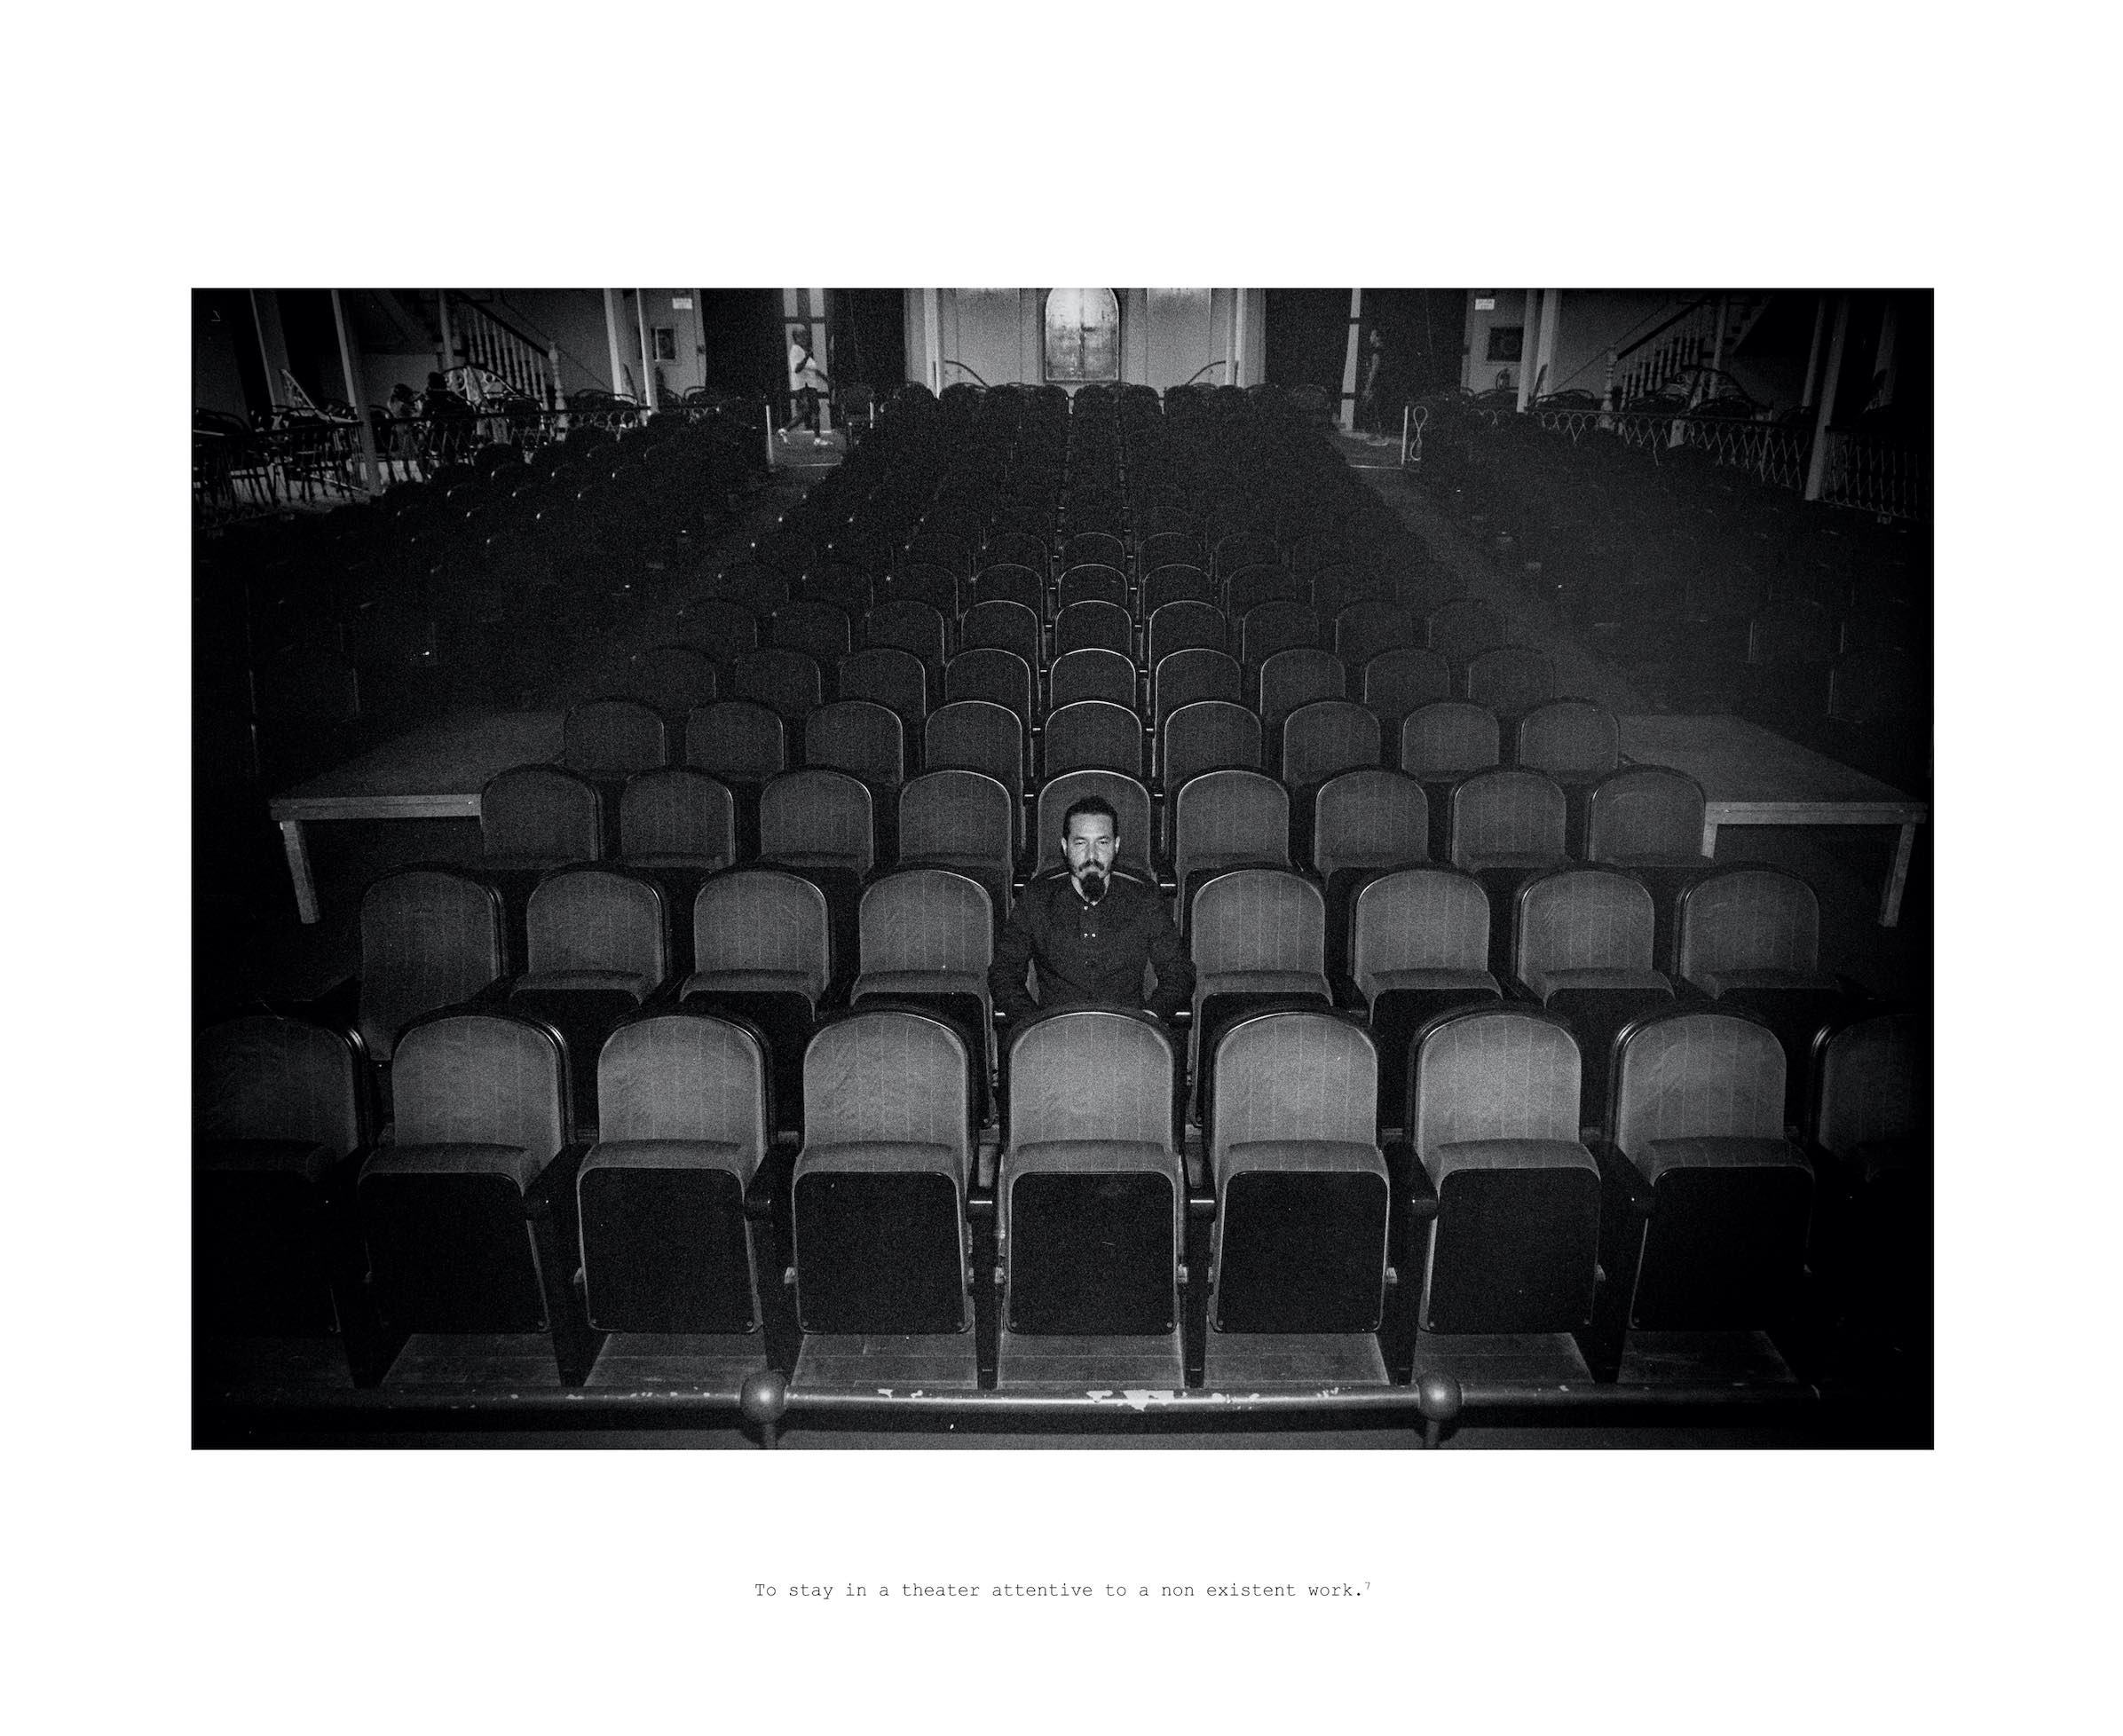 Reynier Leyva Novo - Blank Check - About how to empty the mind (To stay in a theater attentive to a non existent work), 2020, 35 mm photograph, archival print on Hahnemuhle photo rag Baryta paper, 18 x 22 inches unframed, edition of 3